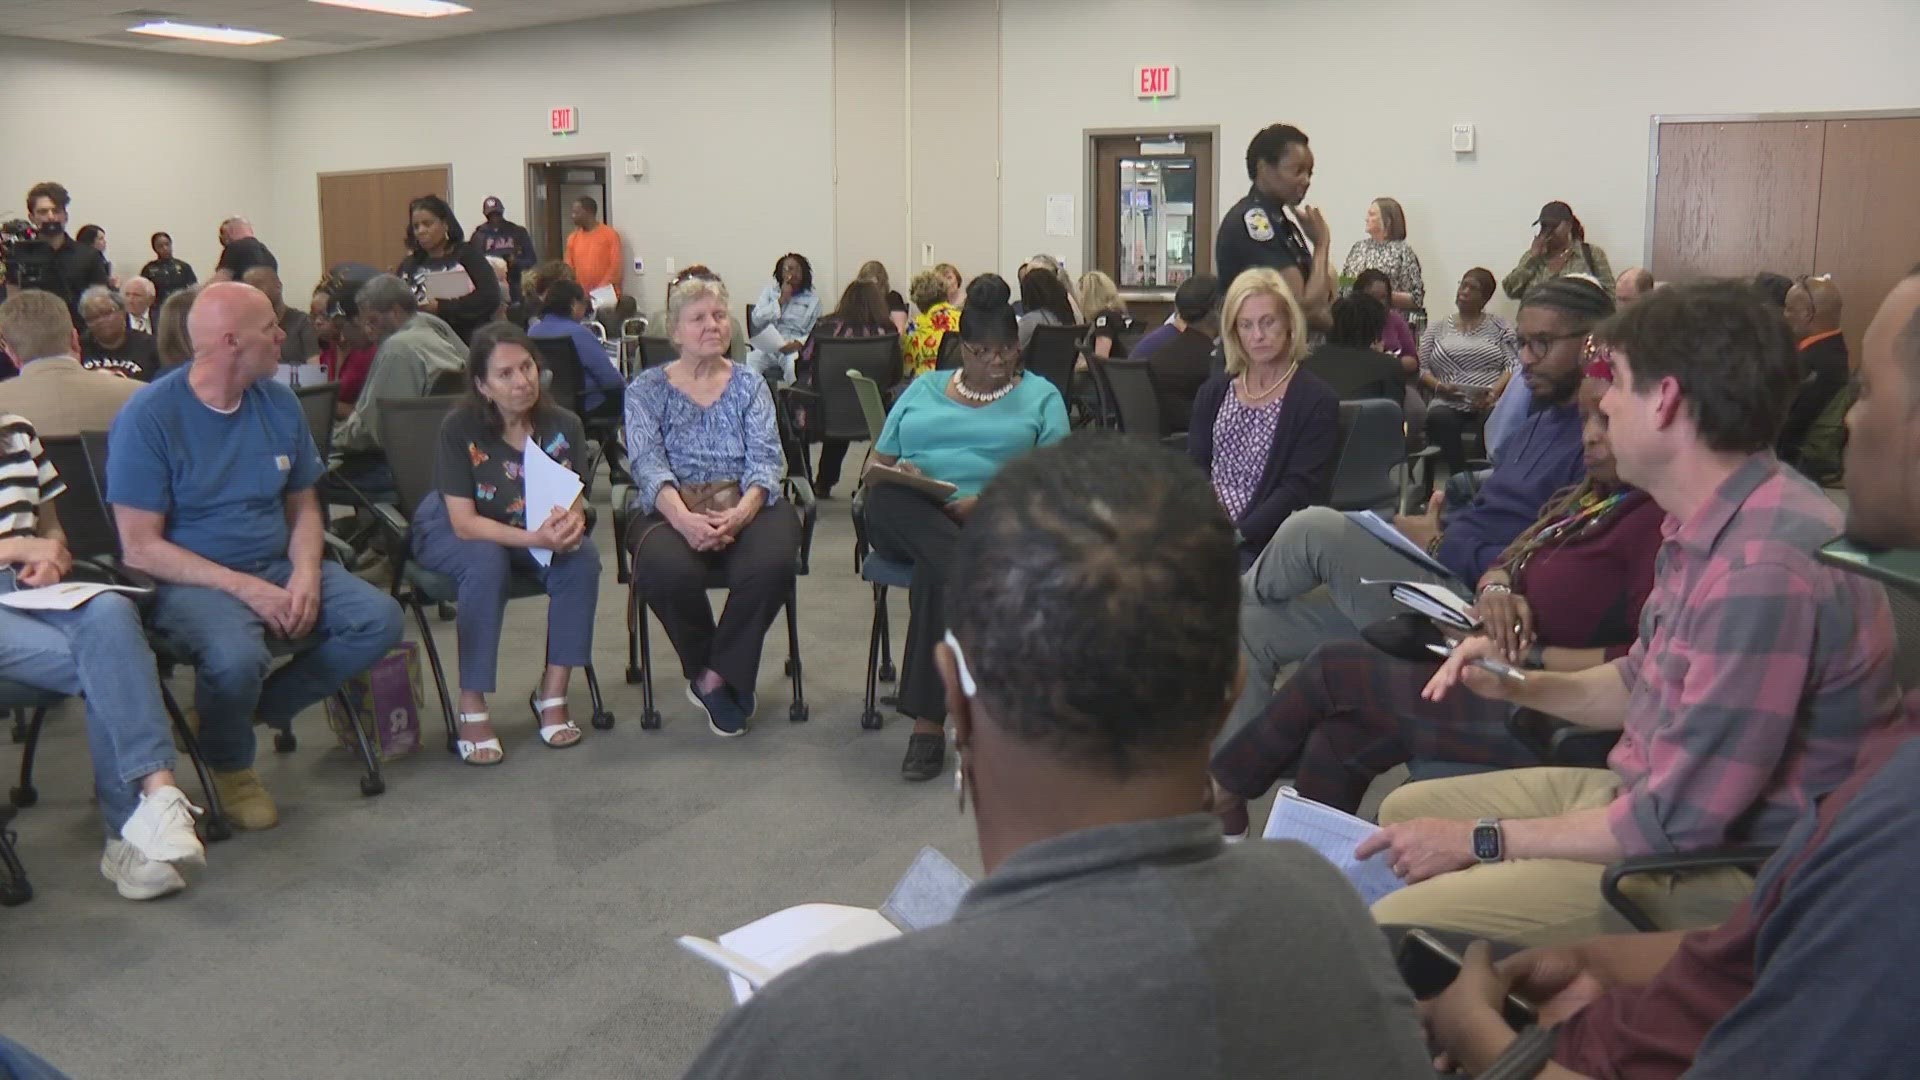 In a public meeting, some attendees pleaded for the DOJ to reconsider not having a member of the community at the table in these discussions.